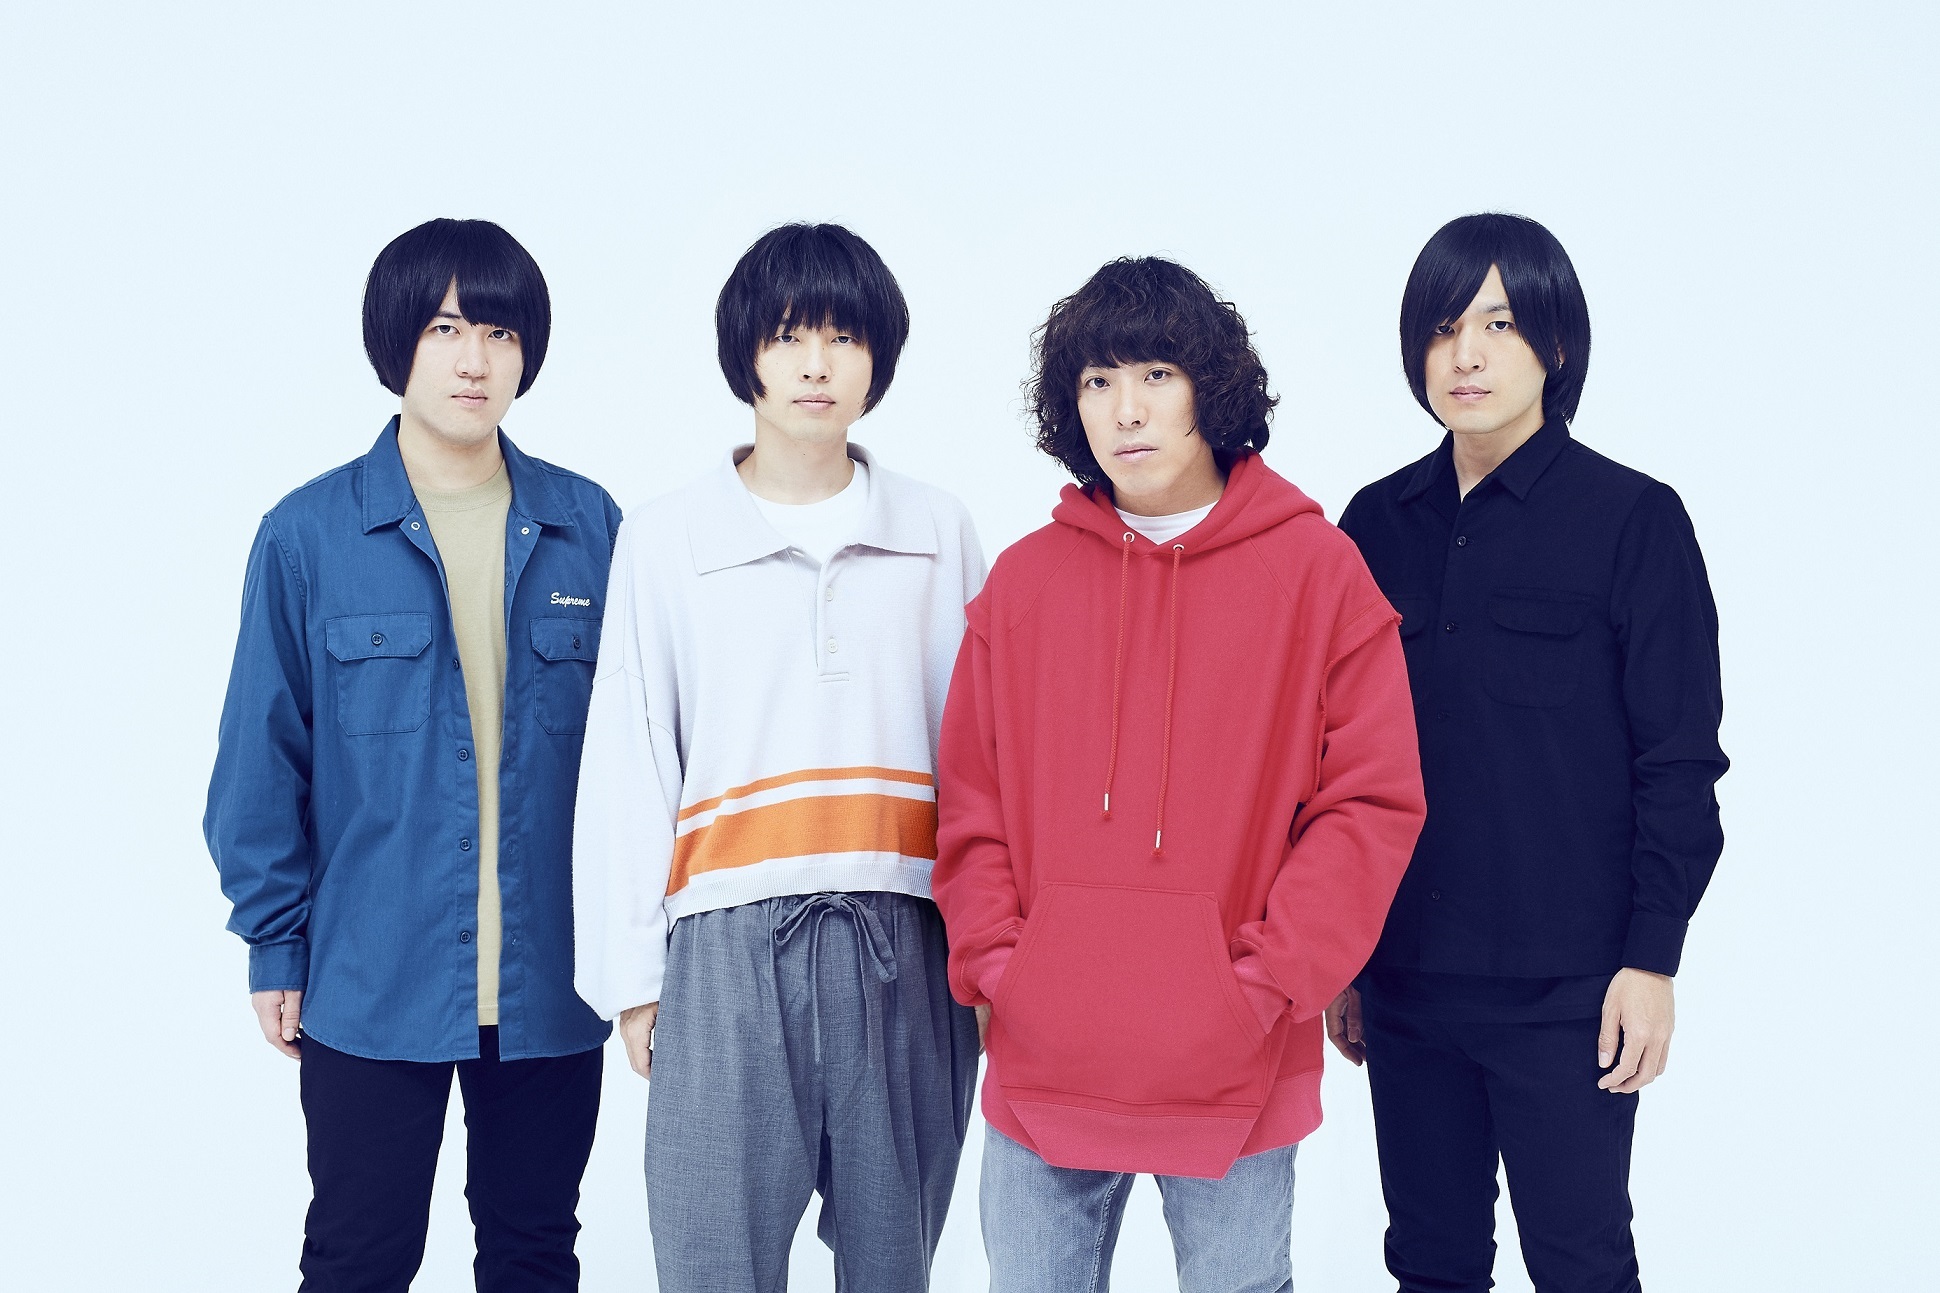 Stream Kana-Boon - Silhouette Tv Size ~Vocal Cover~ by King Anime Covers